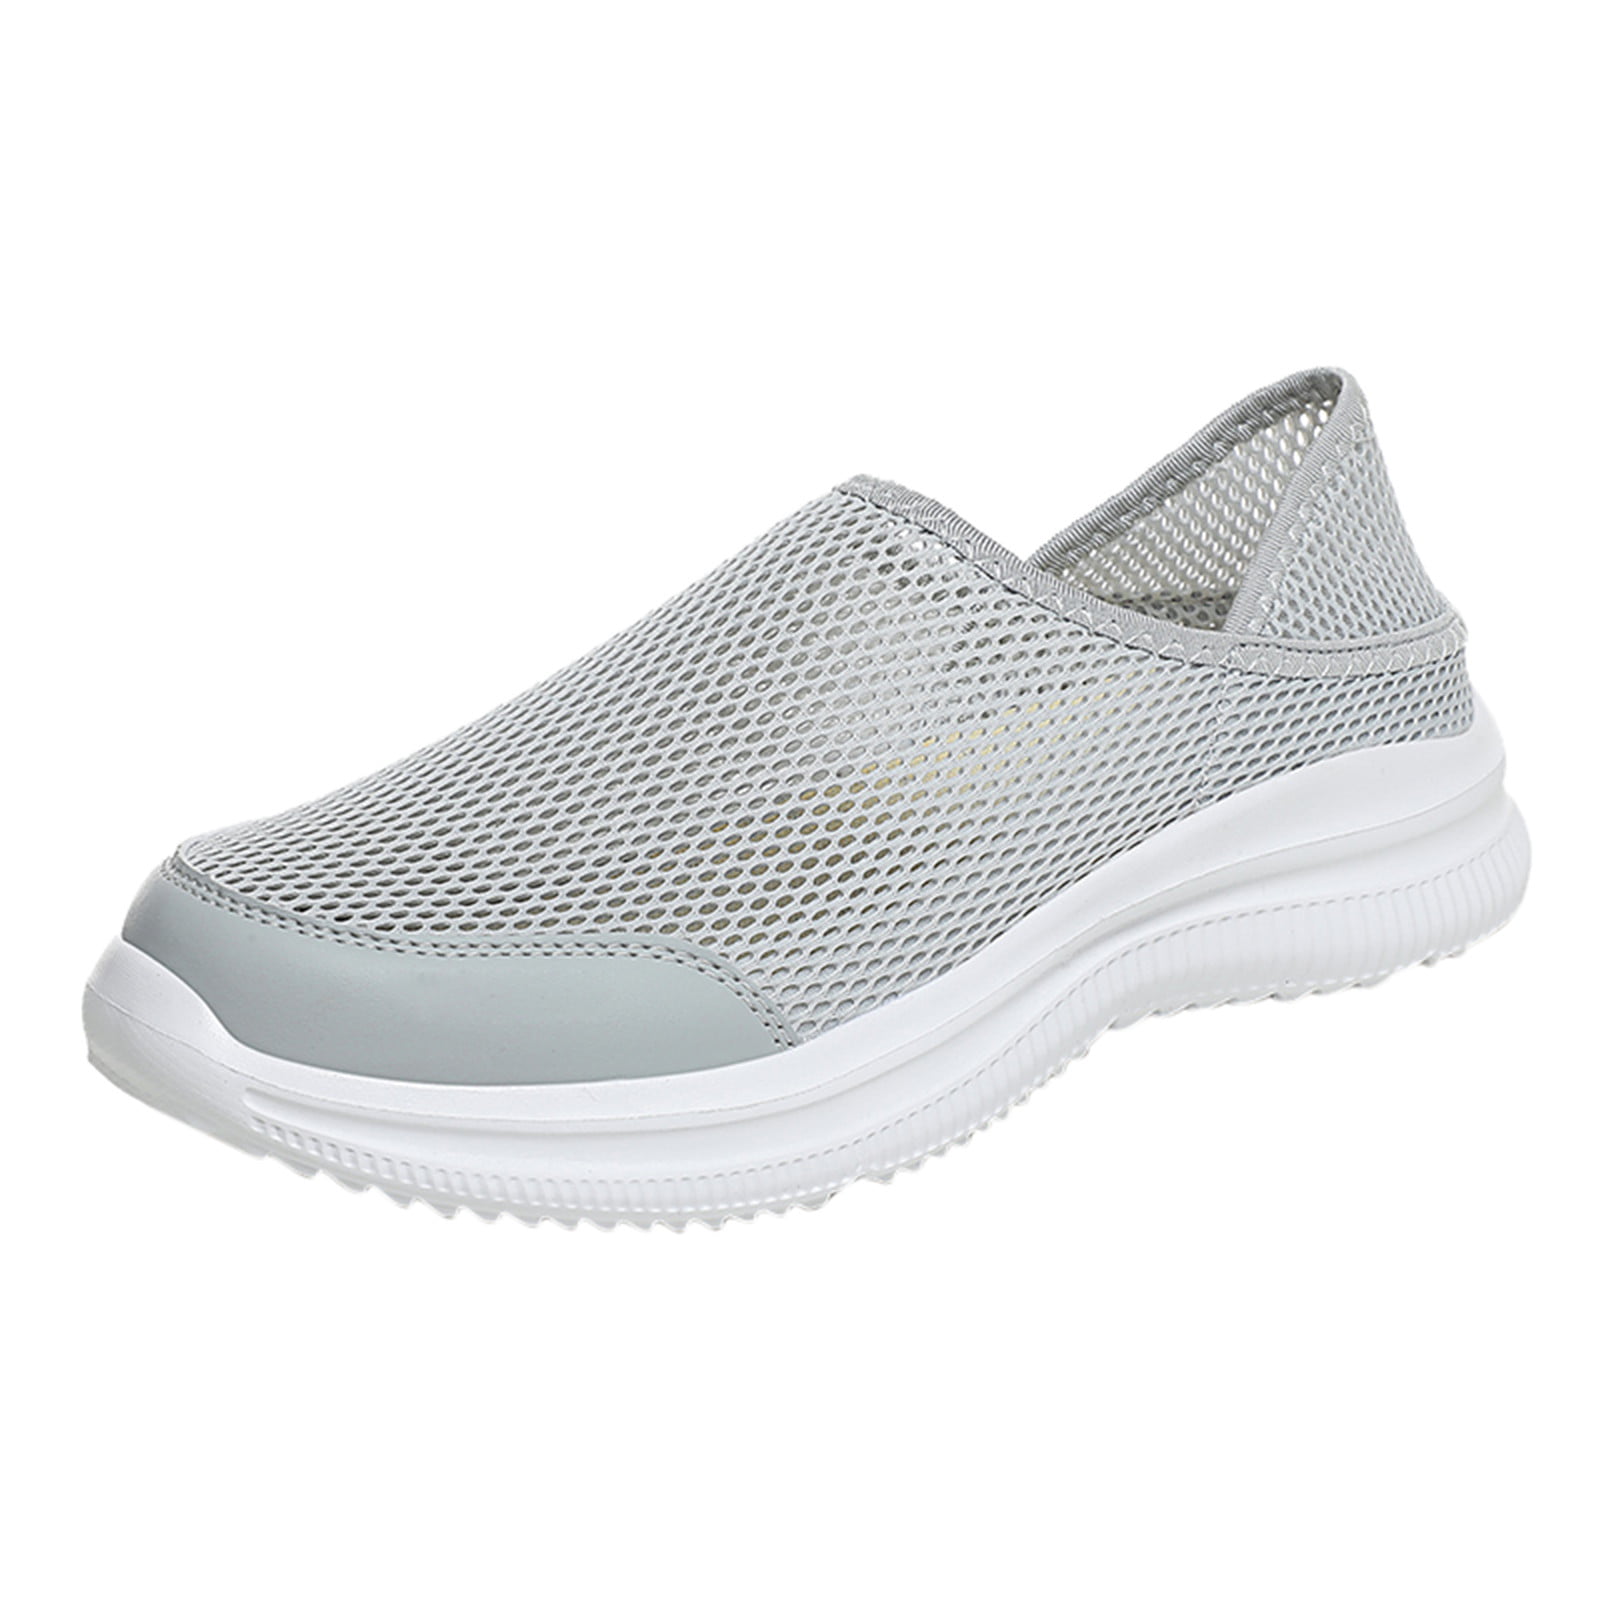 Outdoor Loafers Breathable Sneakers Fashion Men Mesh Casual Sport Shoes Slip On Color Running Breathable Soft Bottom Sneakers - Walmart.com